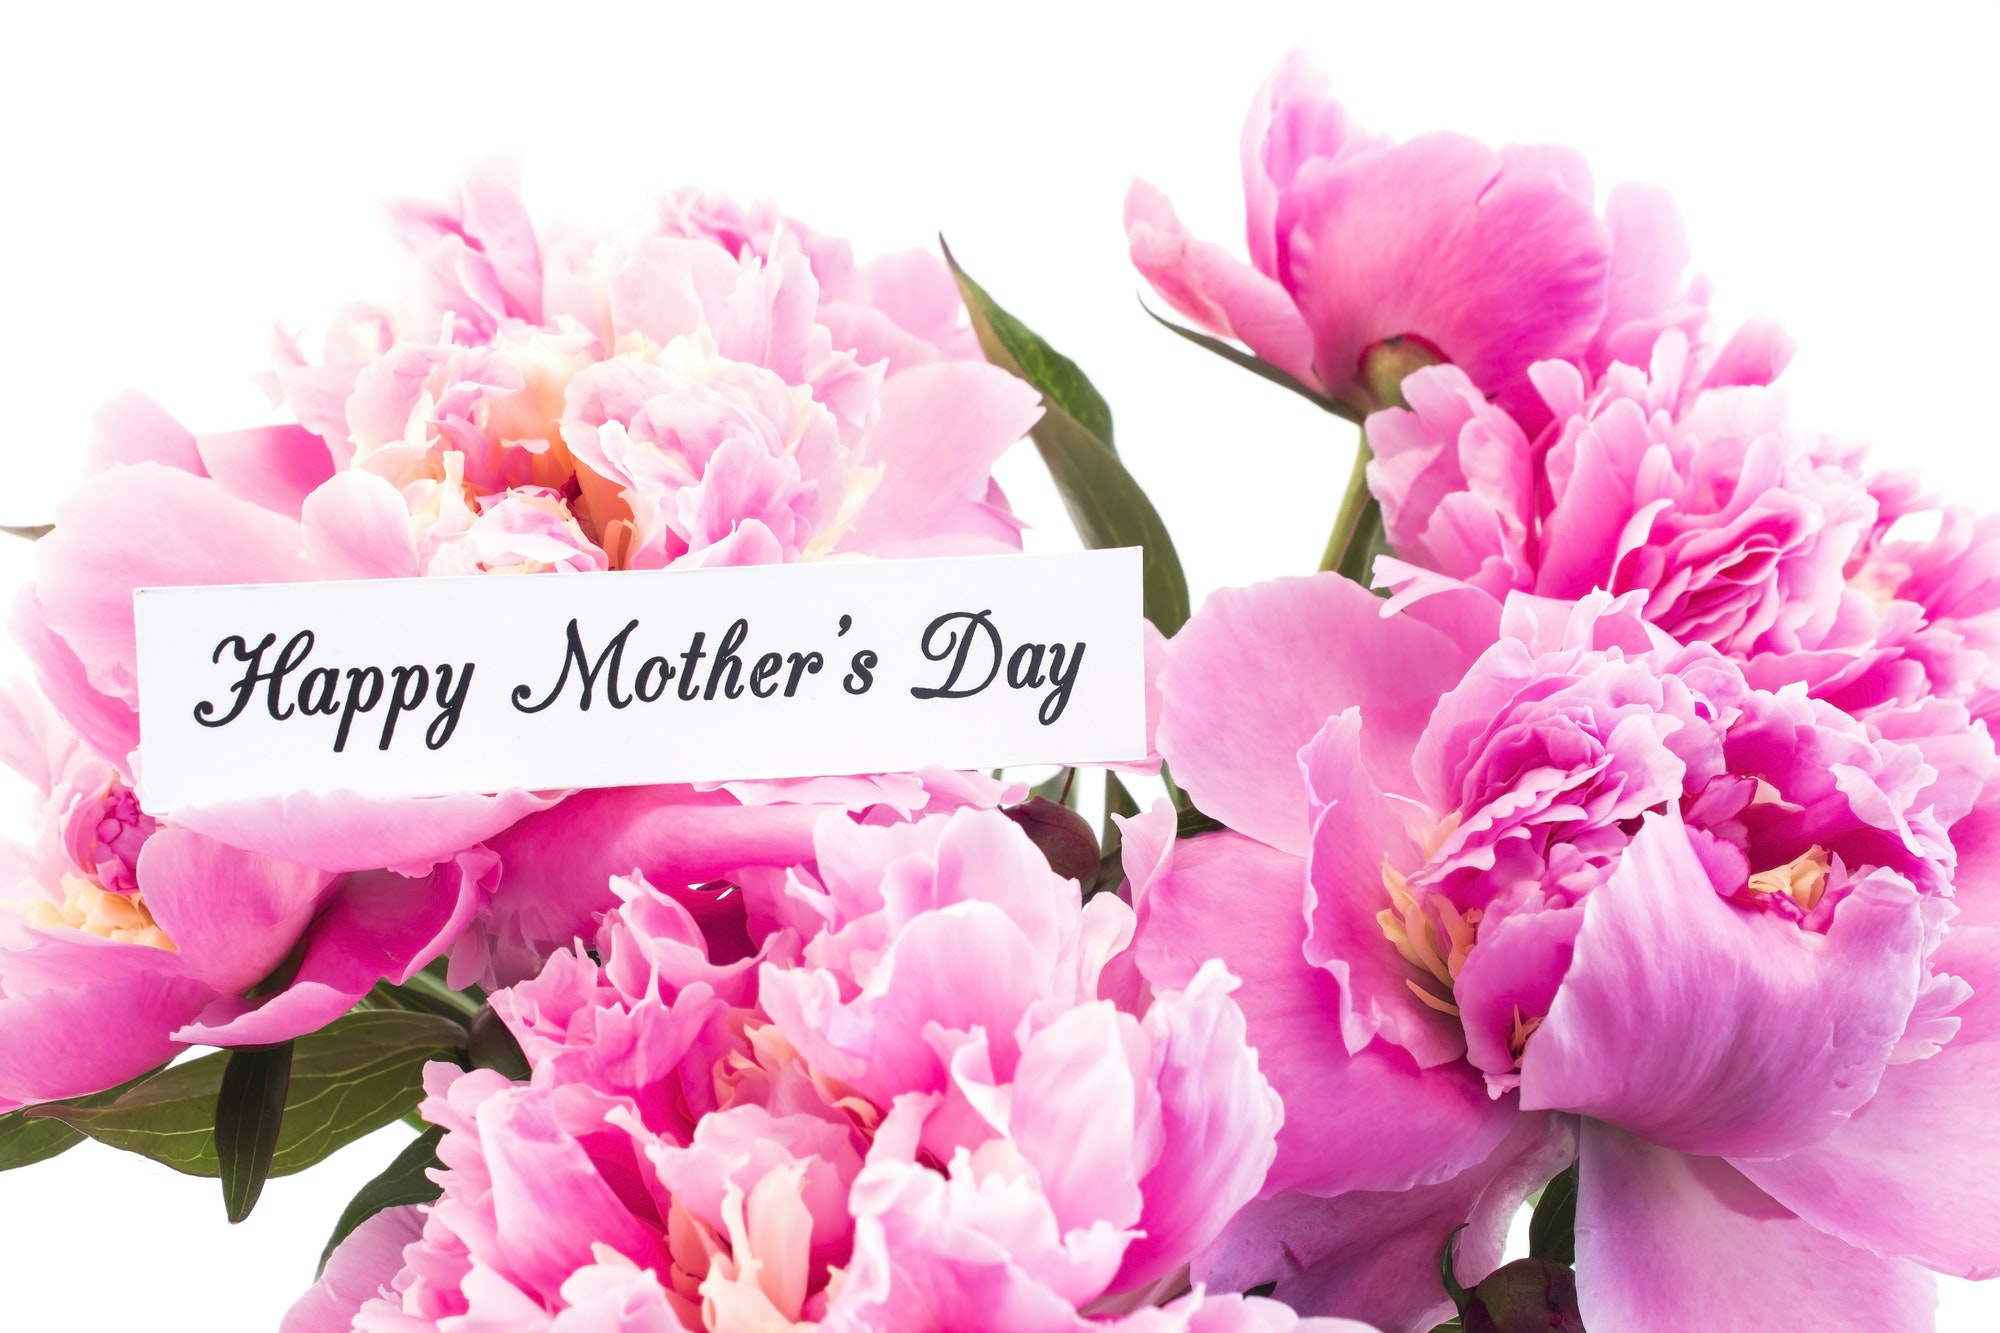 Happy mother's day, greeting card, with pink peonies